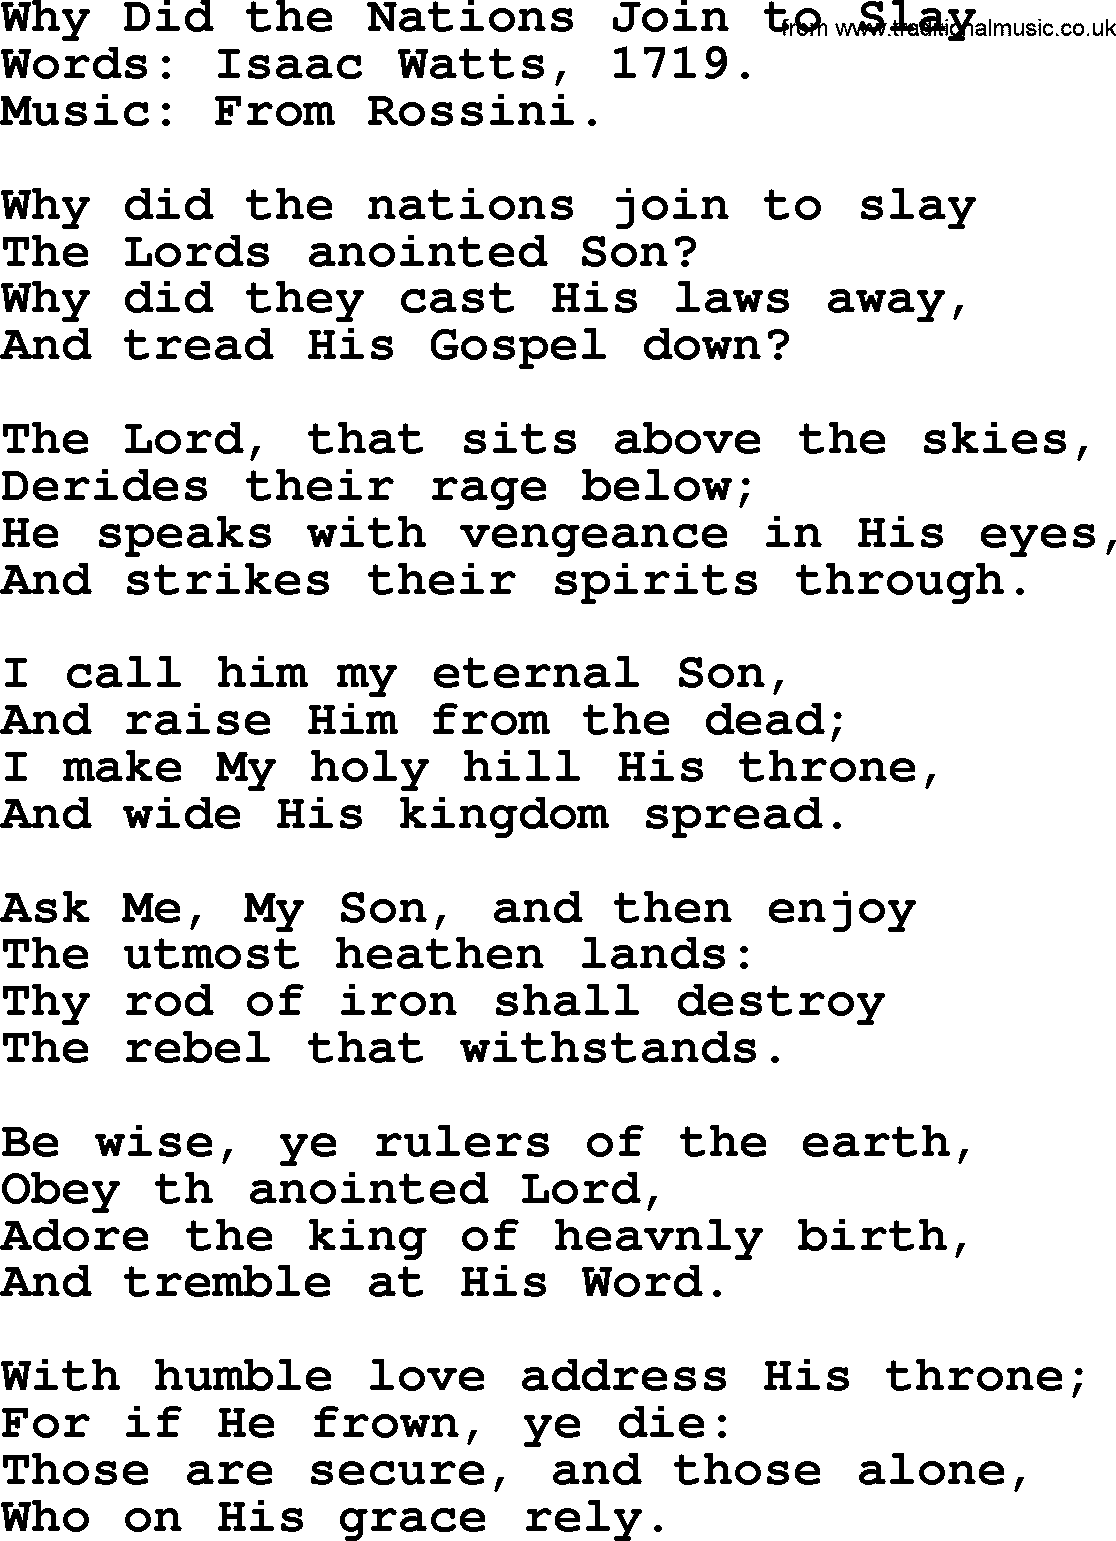 Isaac Watts Christian hymn: Why Did the Nations Join to Slay- lyricss